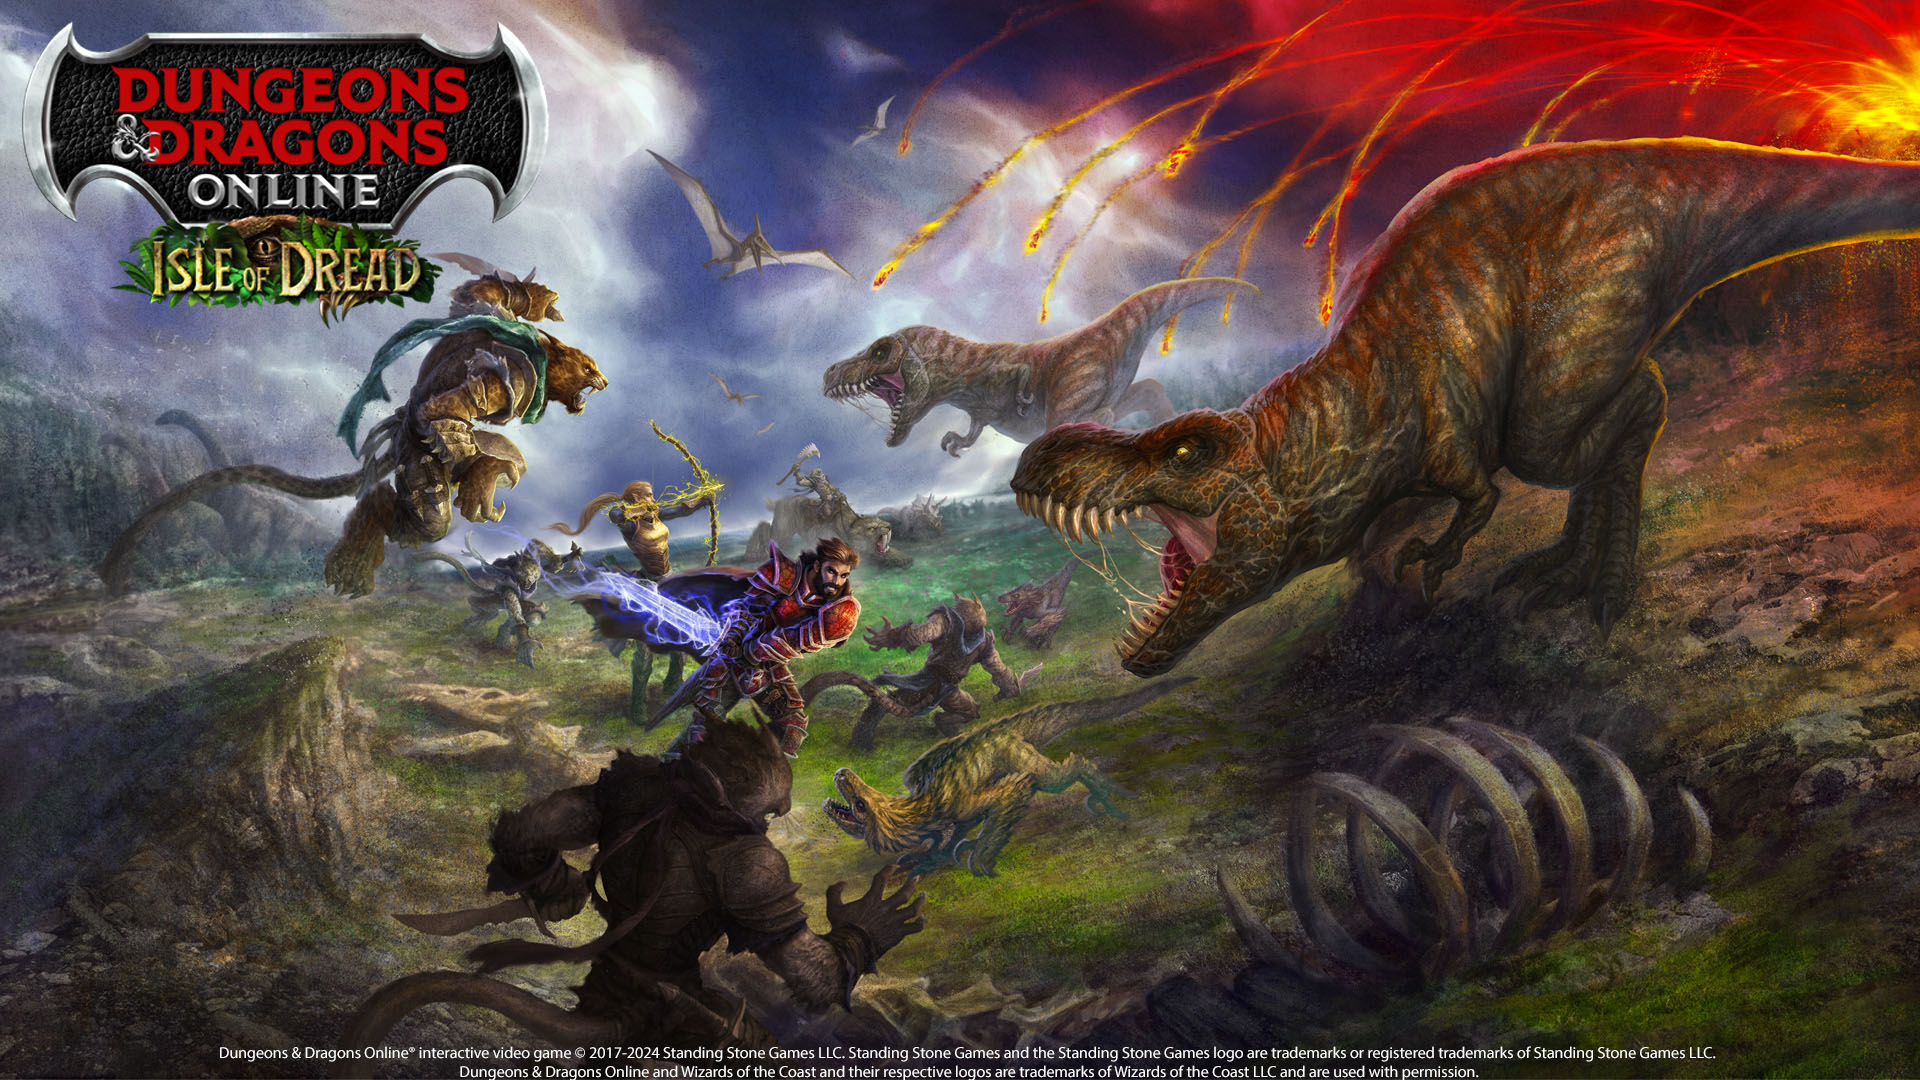 Dungeons & Dragons Online Offers Free Expansion Pack in April to Celebrate 50th Anniversary